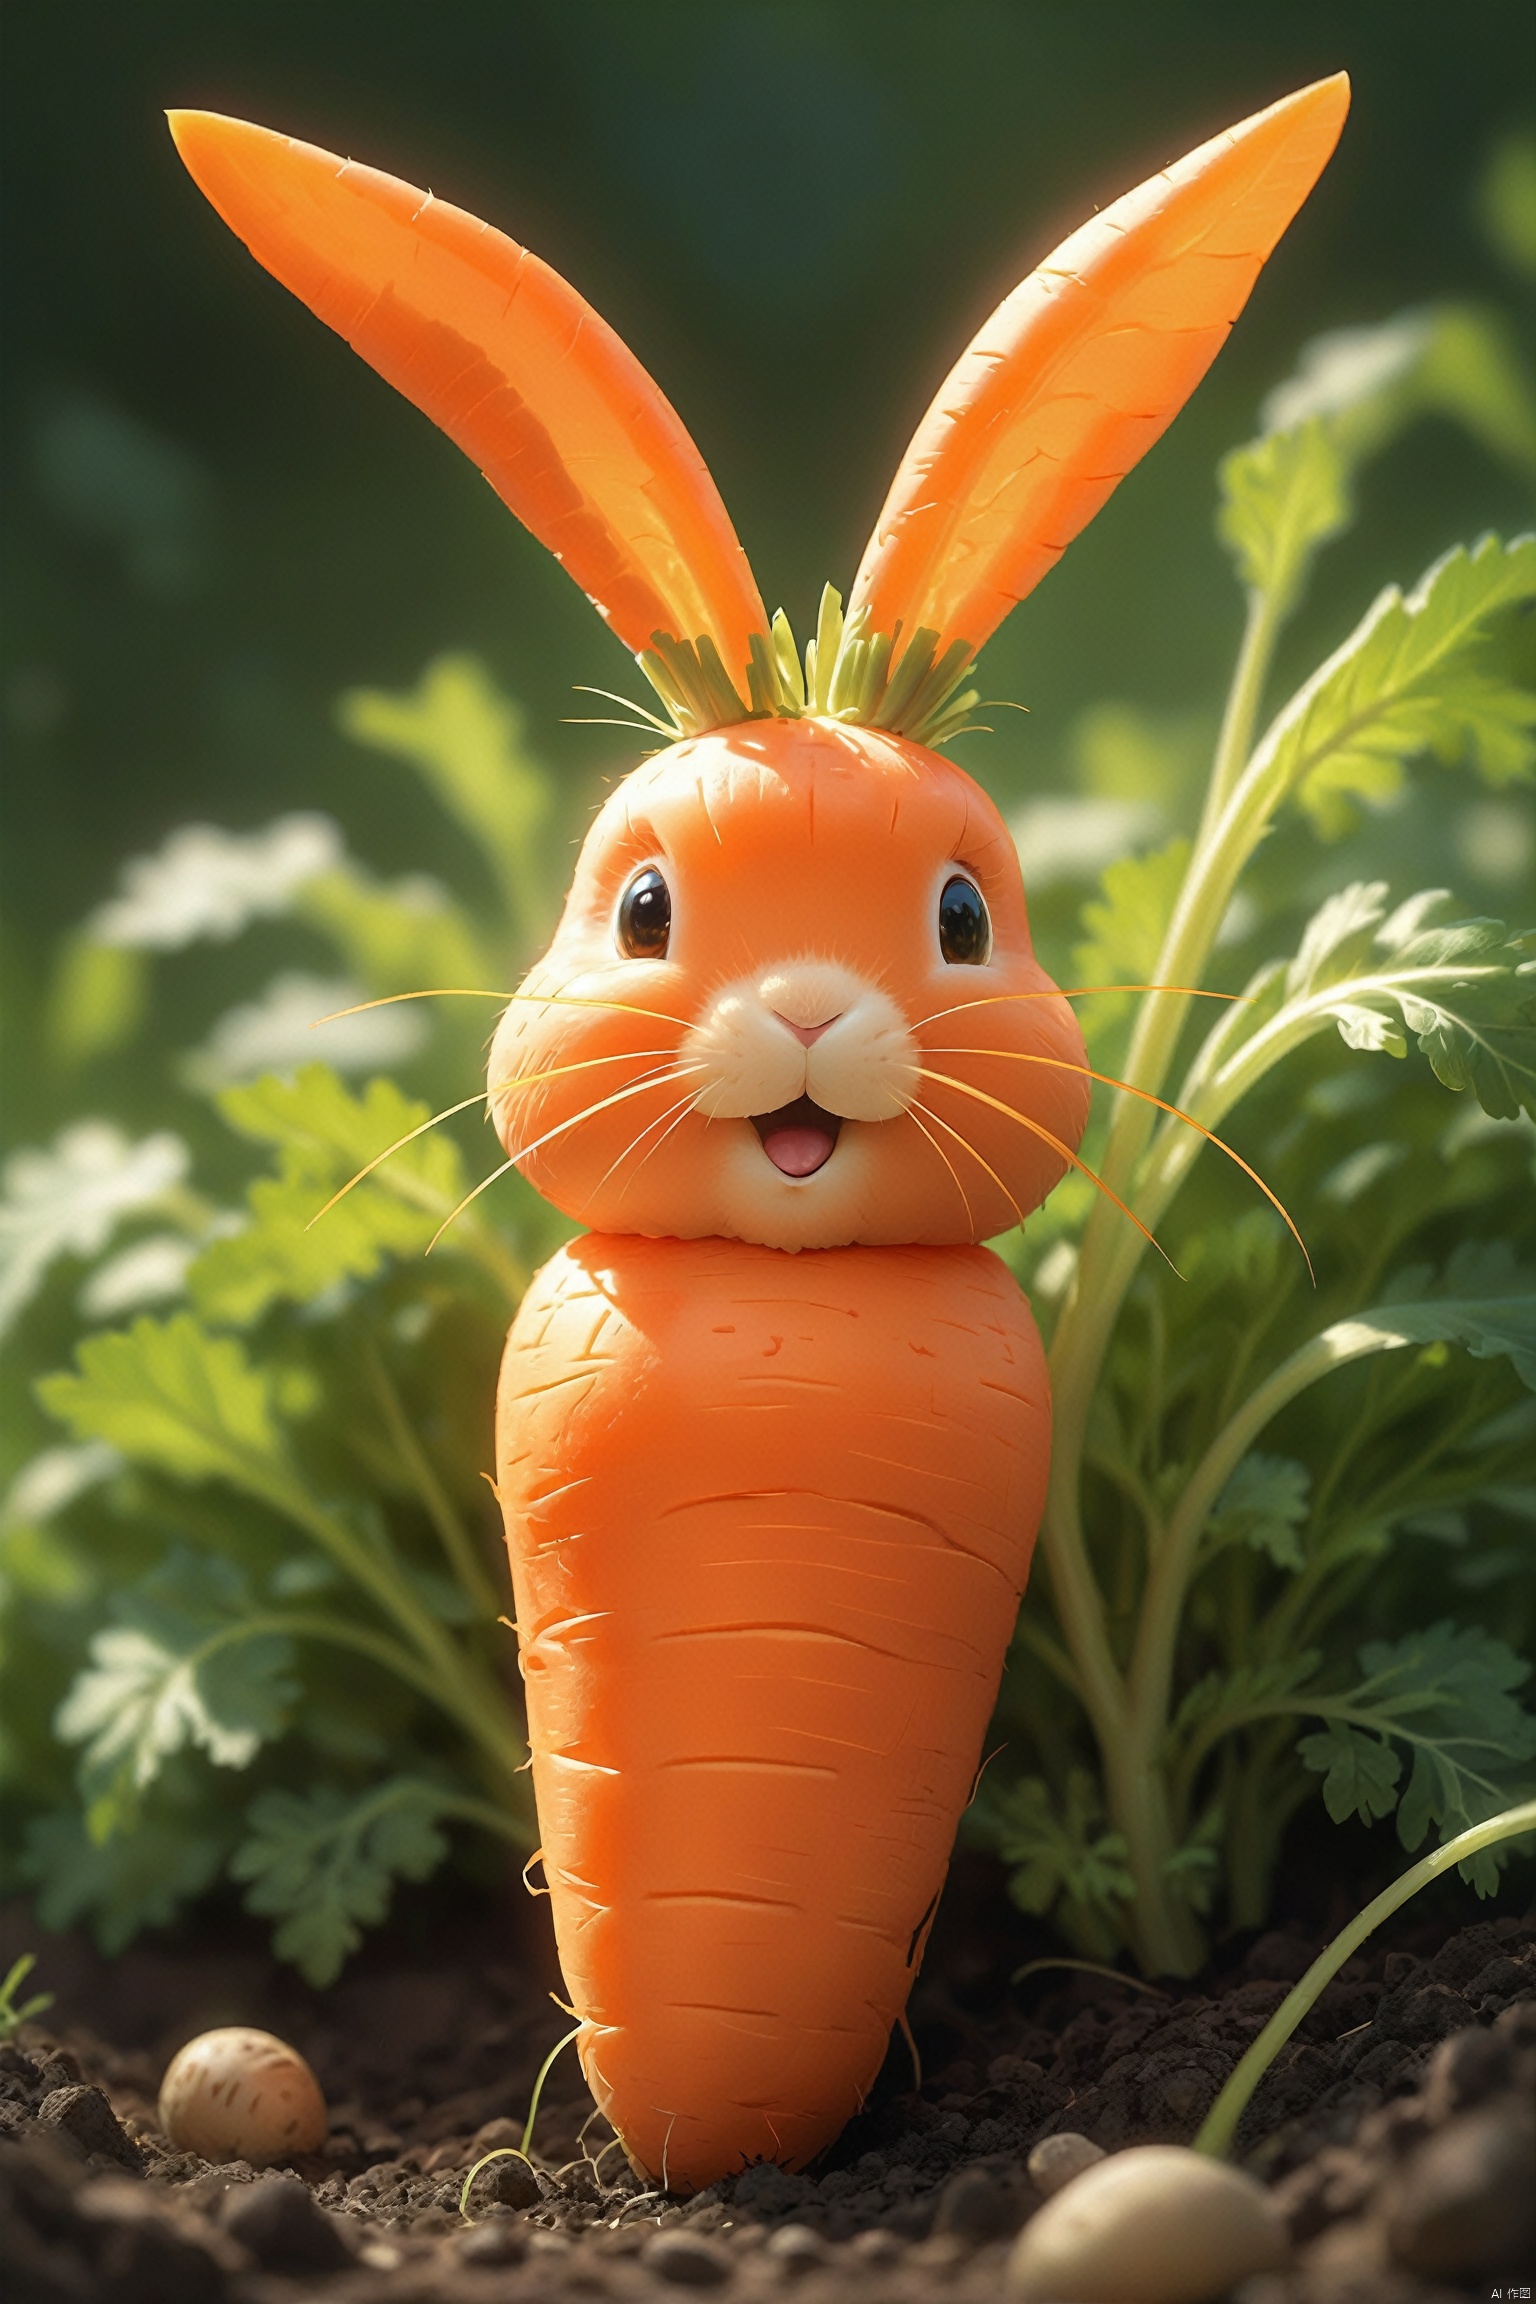 A carrot grows out of the soil with a distinctive shape; its top splits into two prongs, resembling the long ears of a rabbit. The carrot's body takes on a charmingly curved form, akin to the roundness of a rabbit's physique. The entire surface of the carrot is smooth, with the orange-red skin appearing particularly vibrant under the sunlight, and the textures reveal the natural vitality. This carrot, shaped like a rabbit, becomes a unique spectacle in the garden with its quaint appearance.